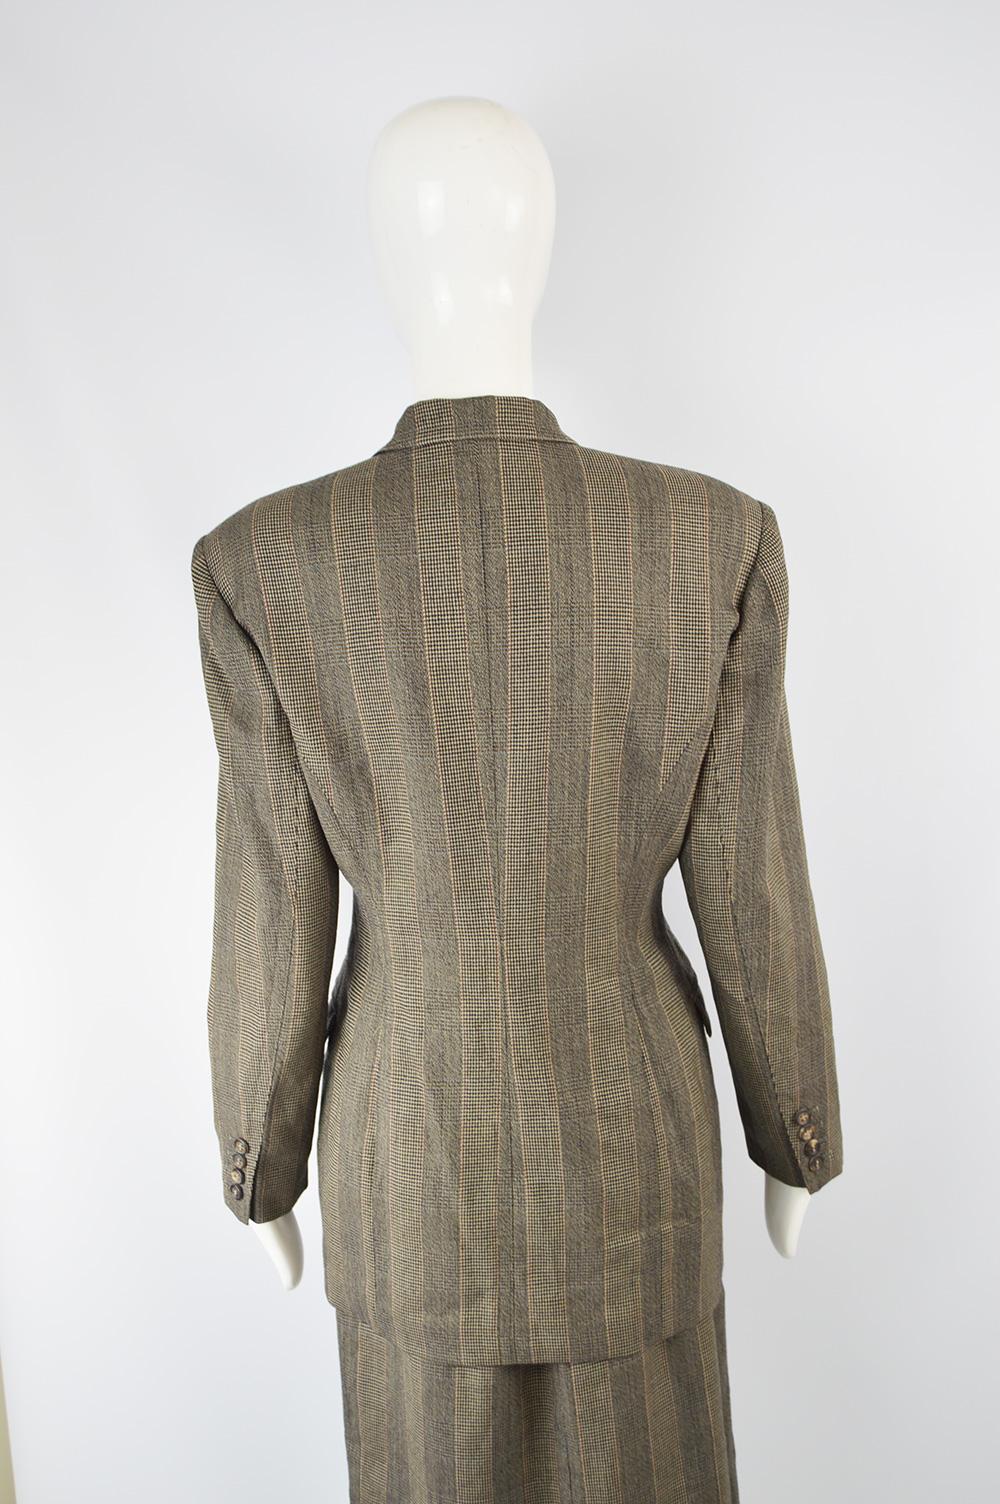 Jil Sander Pure Wool Double Breasted Tailored Women's Vintage Skirt Suit , 1990s 1